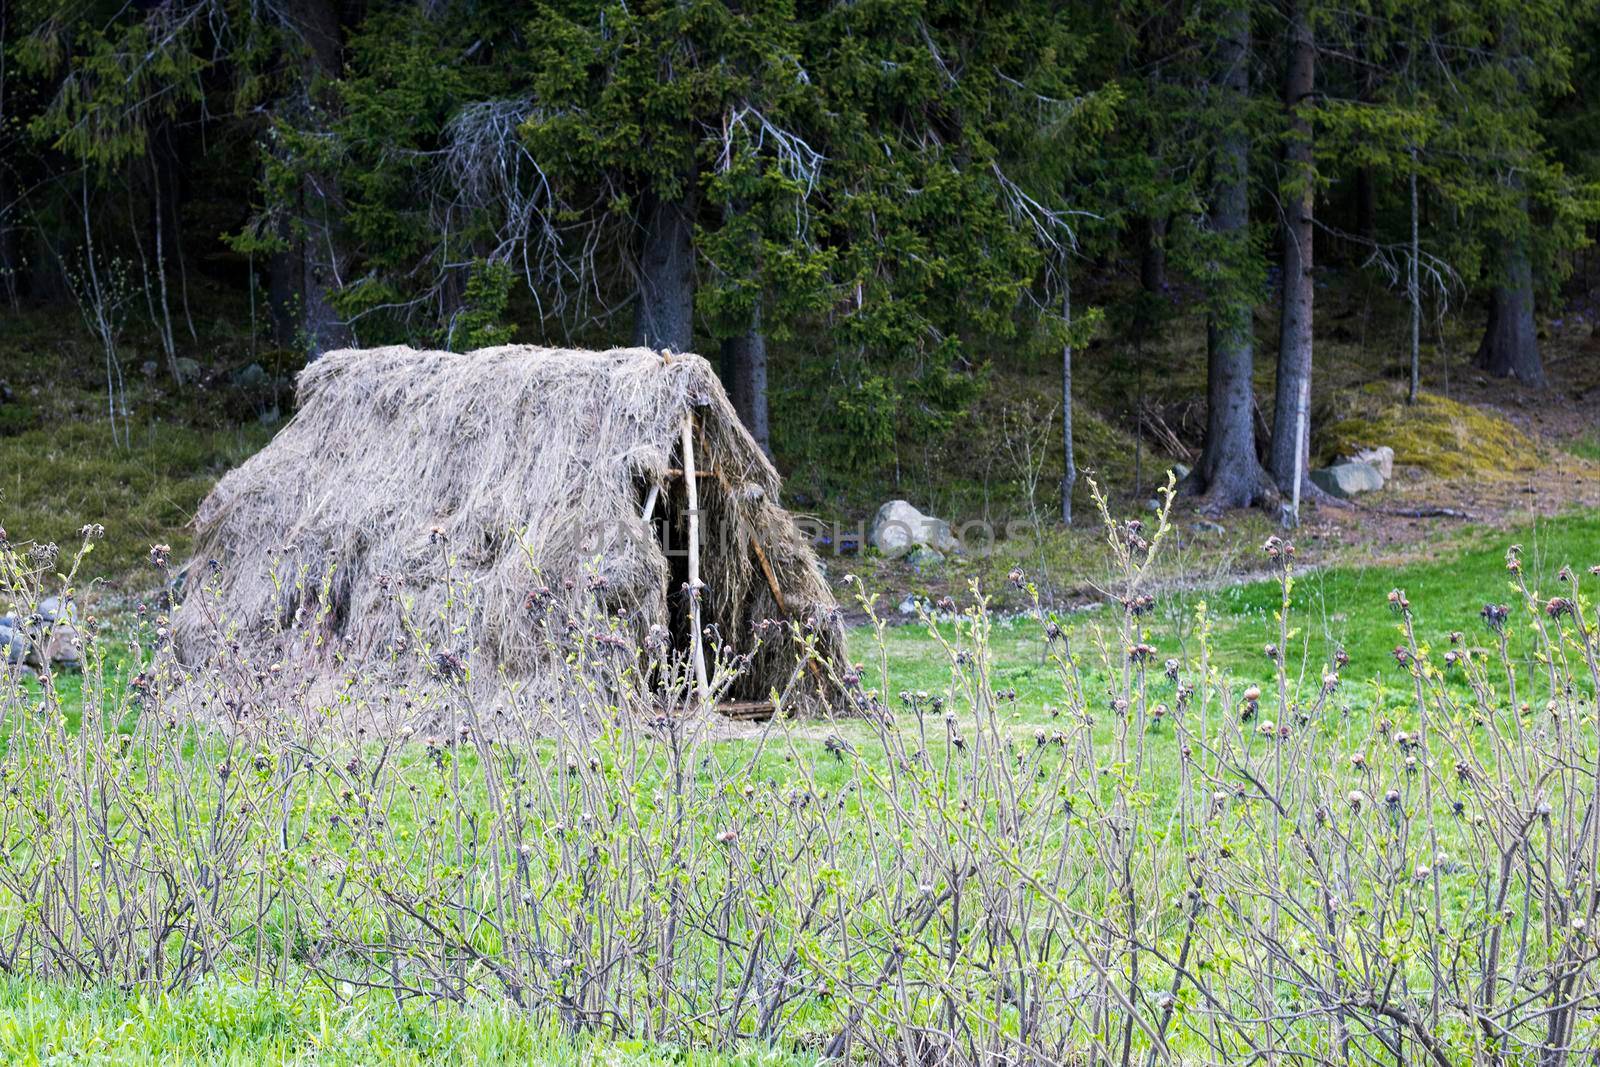 Hut hut in summer forest built with his own hands from tree branches by Sonluna